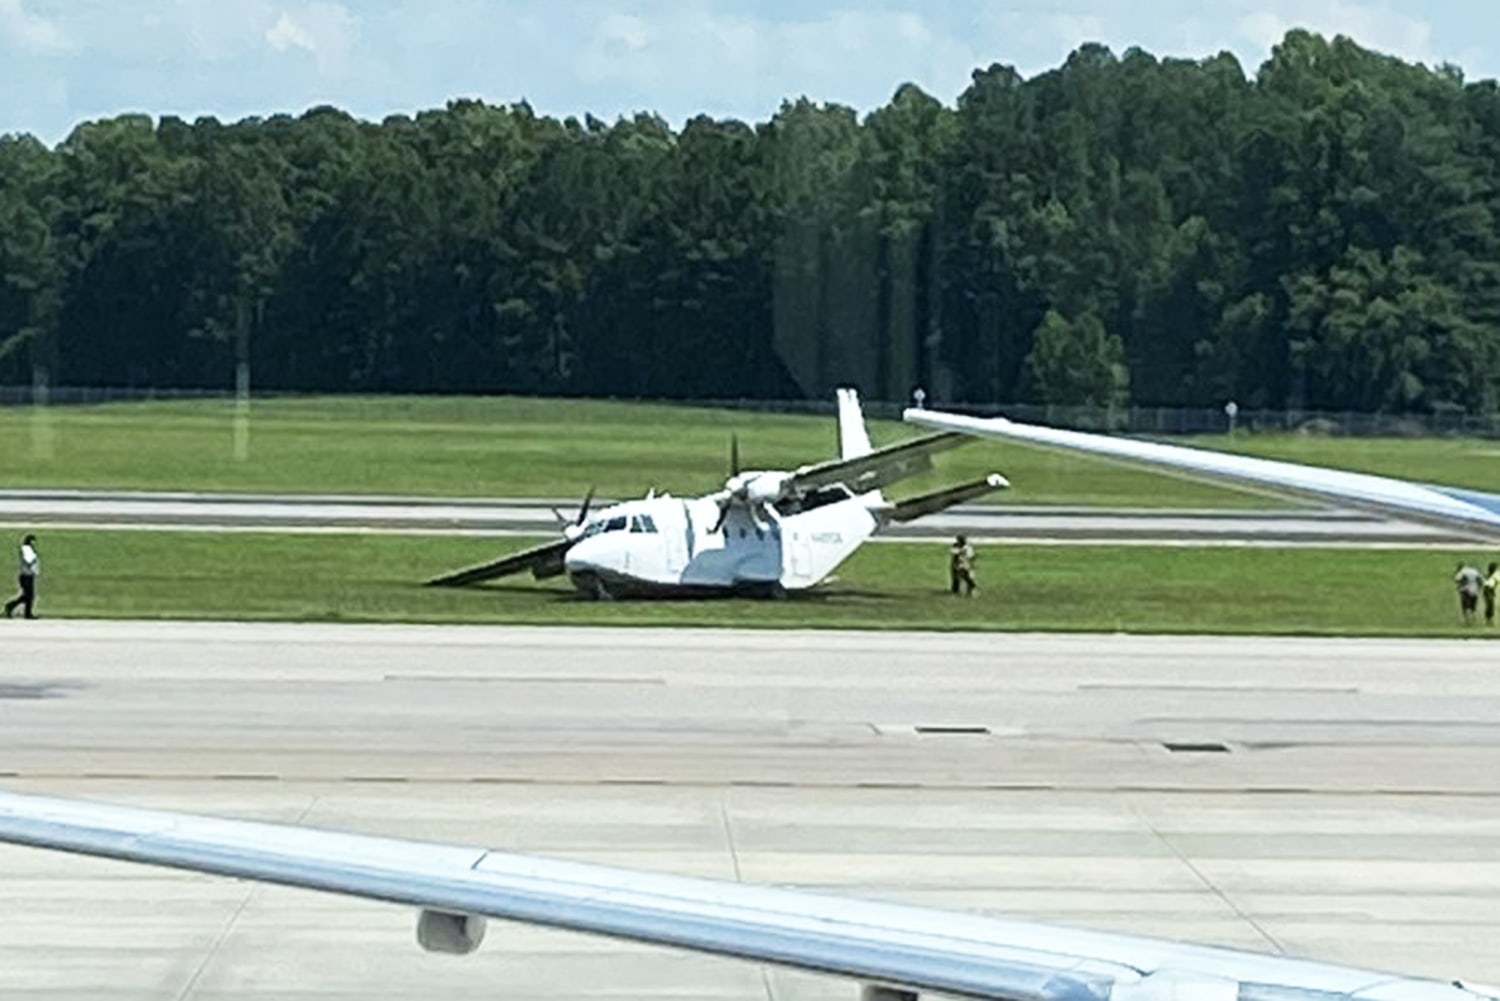 Body of co-pilot who exited plane mid-flight during emergency landing recovered in North Carolina neighborhood